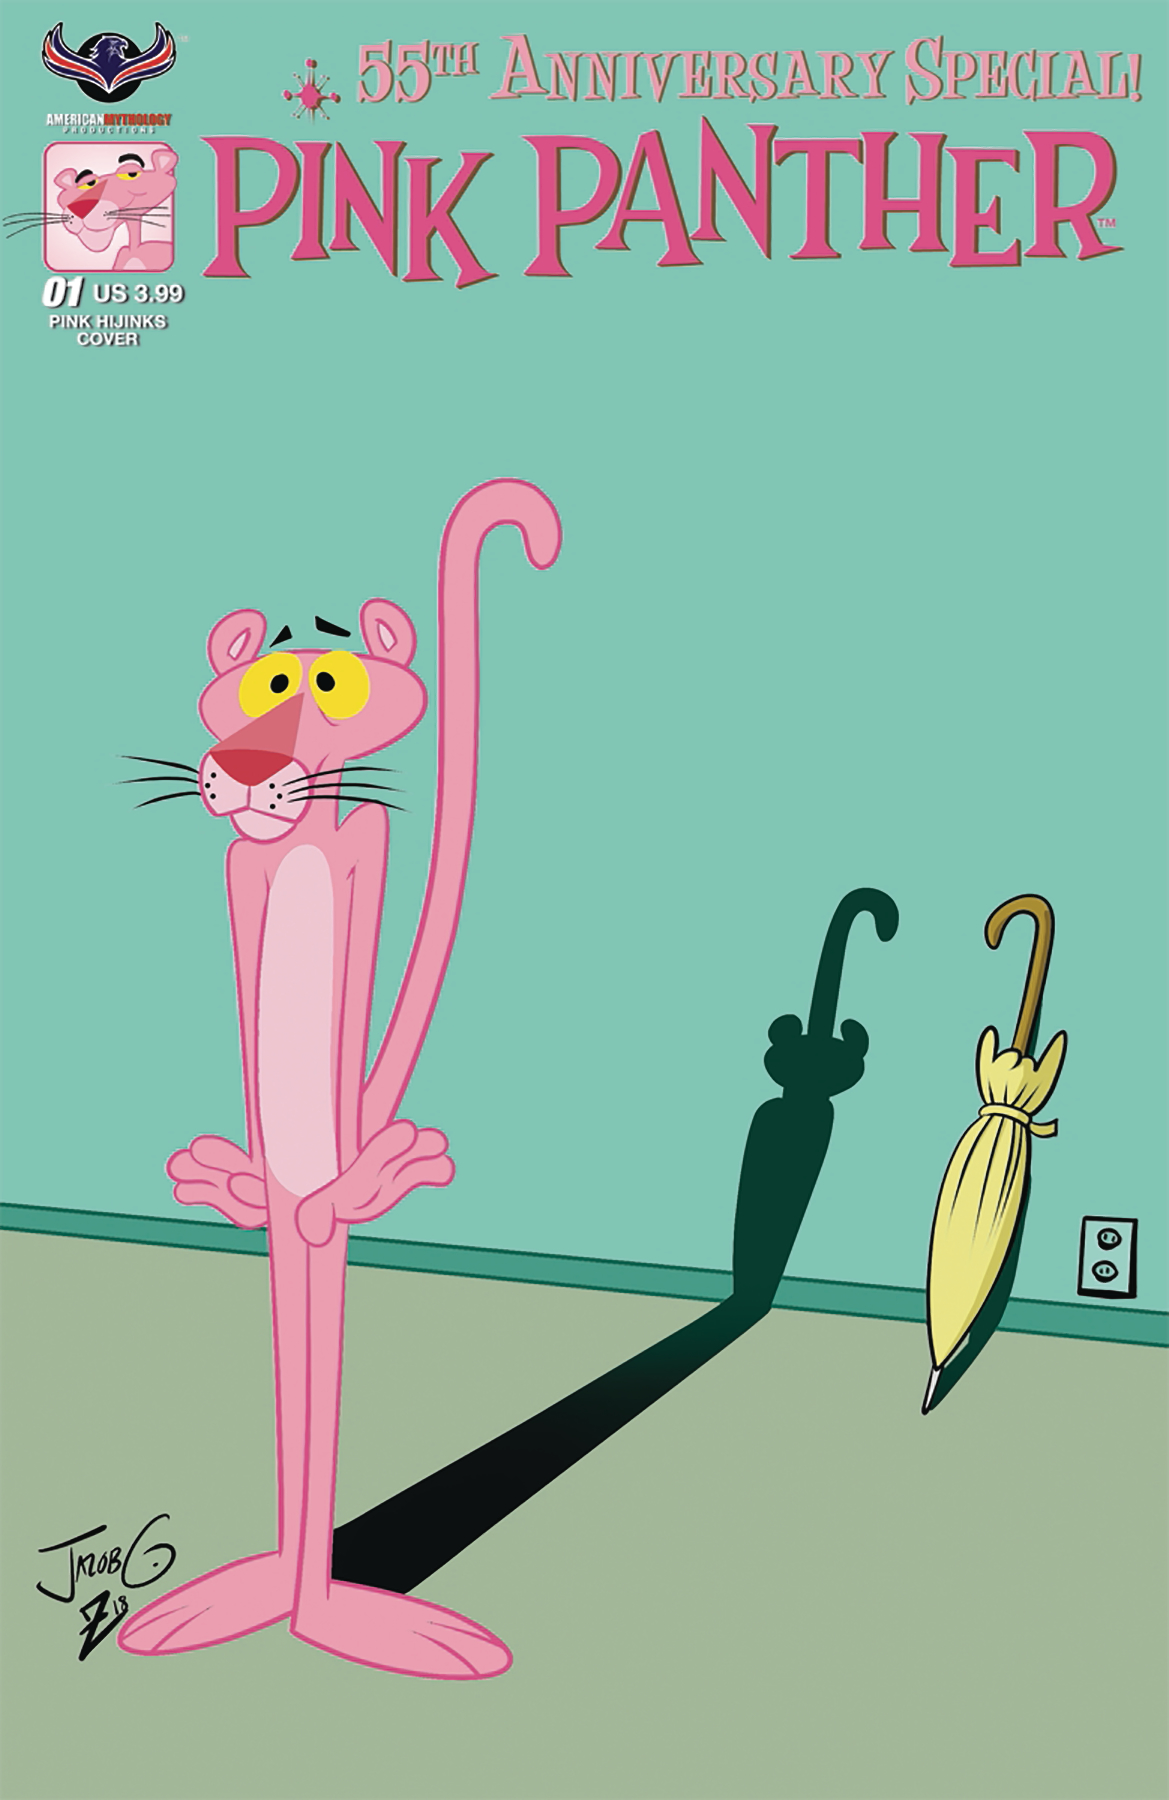 MAR181093 - PINK PANTHER 55TH ANNIVERSARY SPECIAL #1 PINK ...